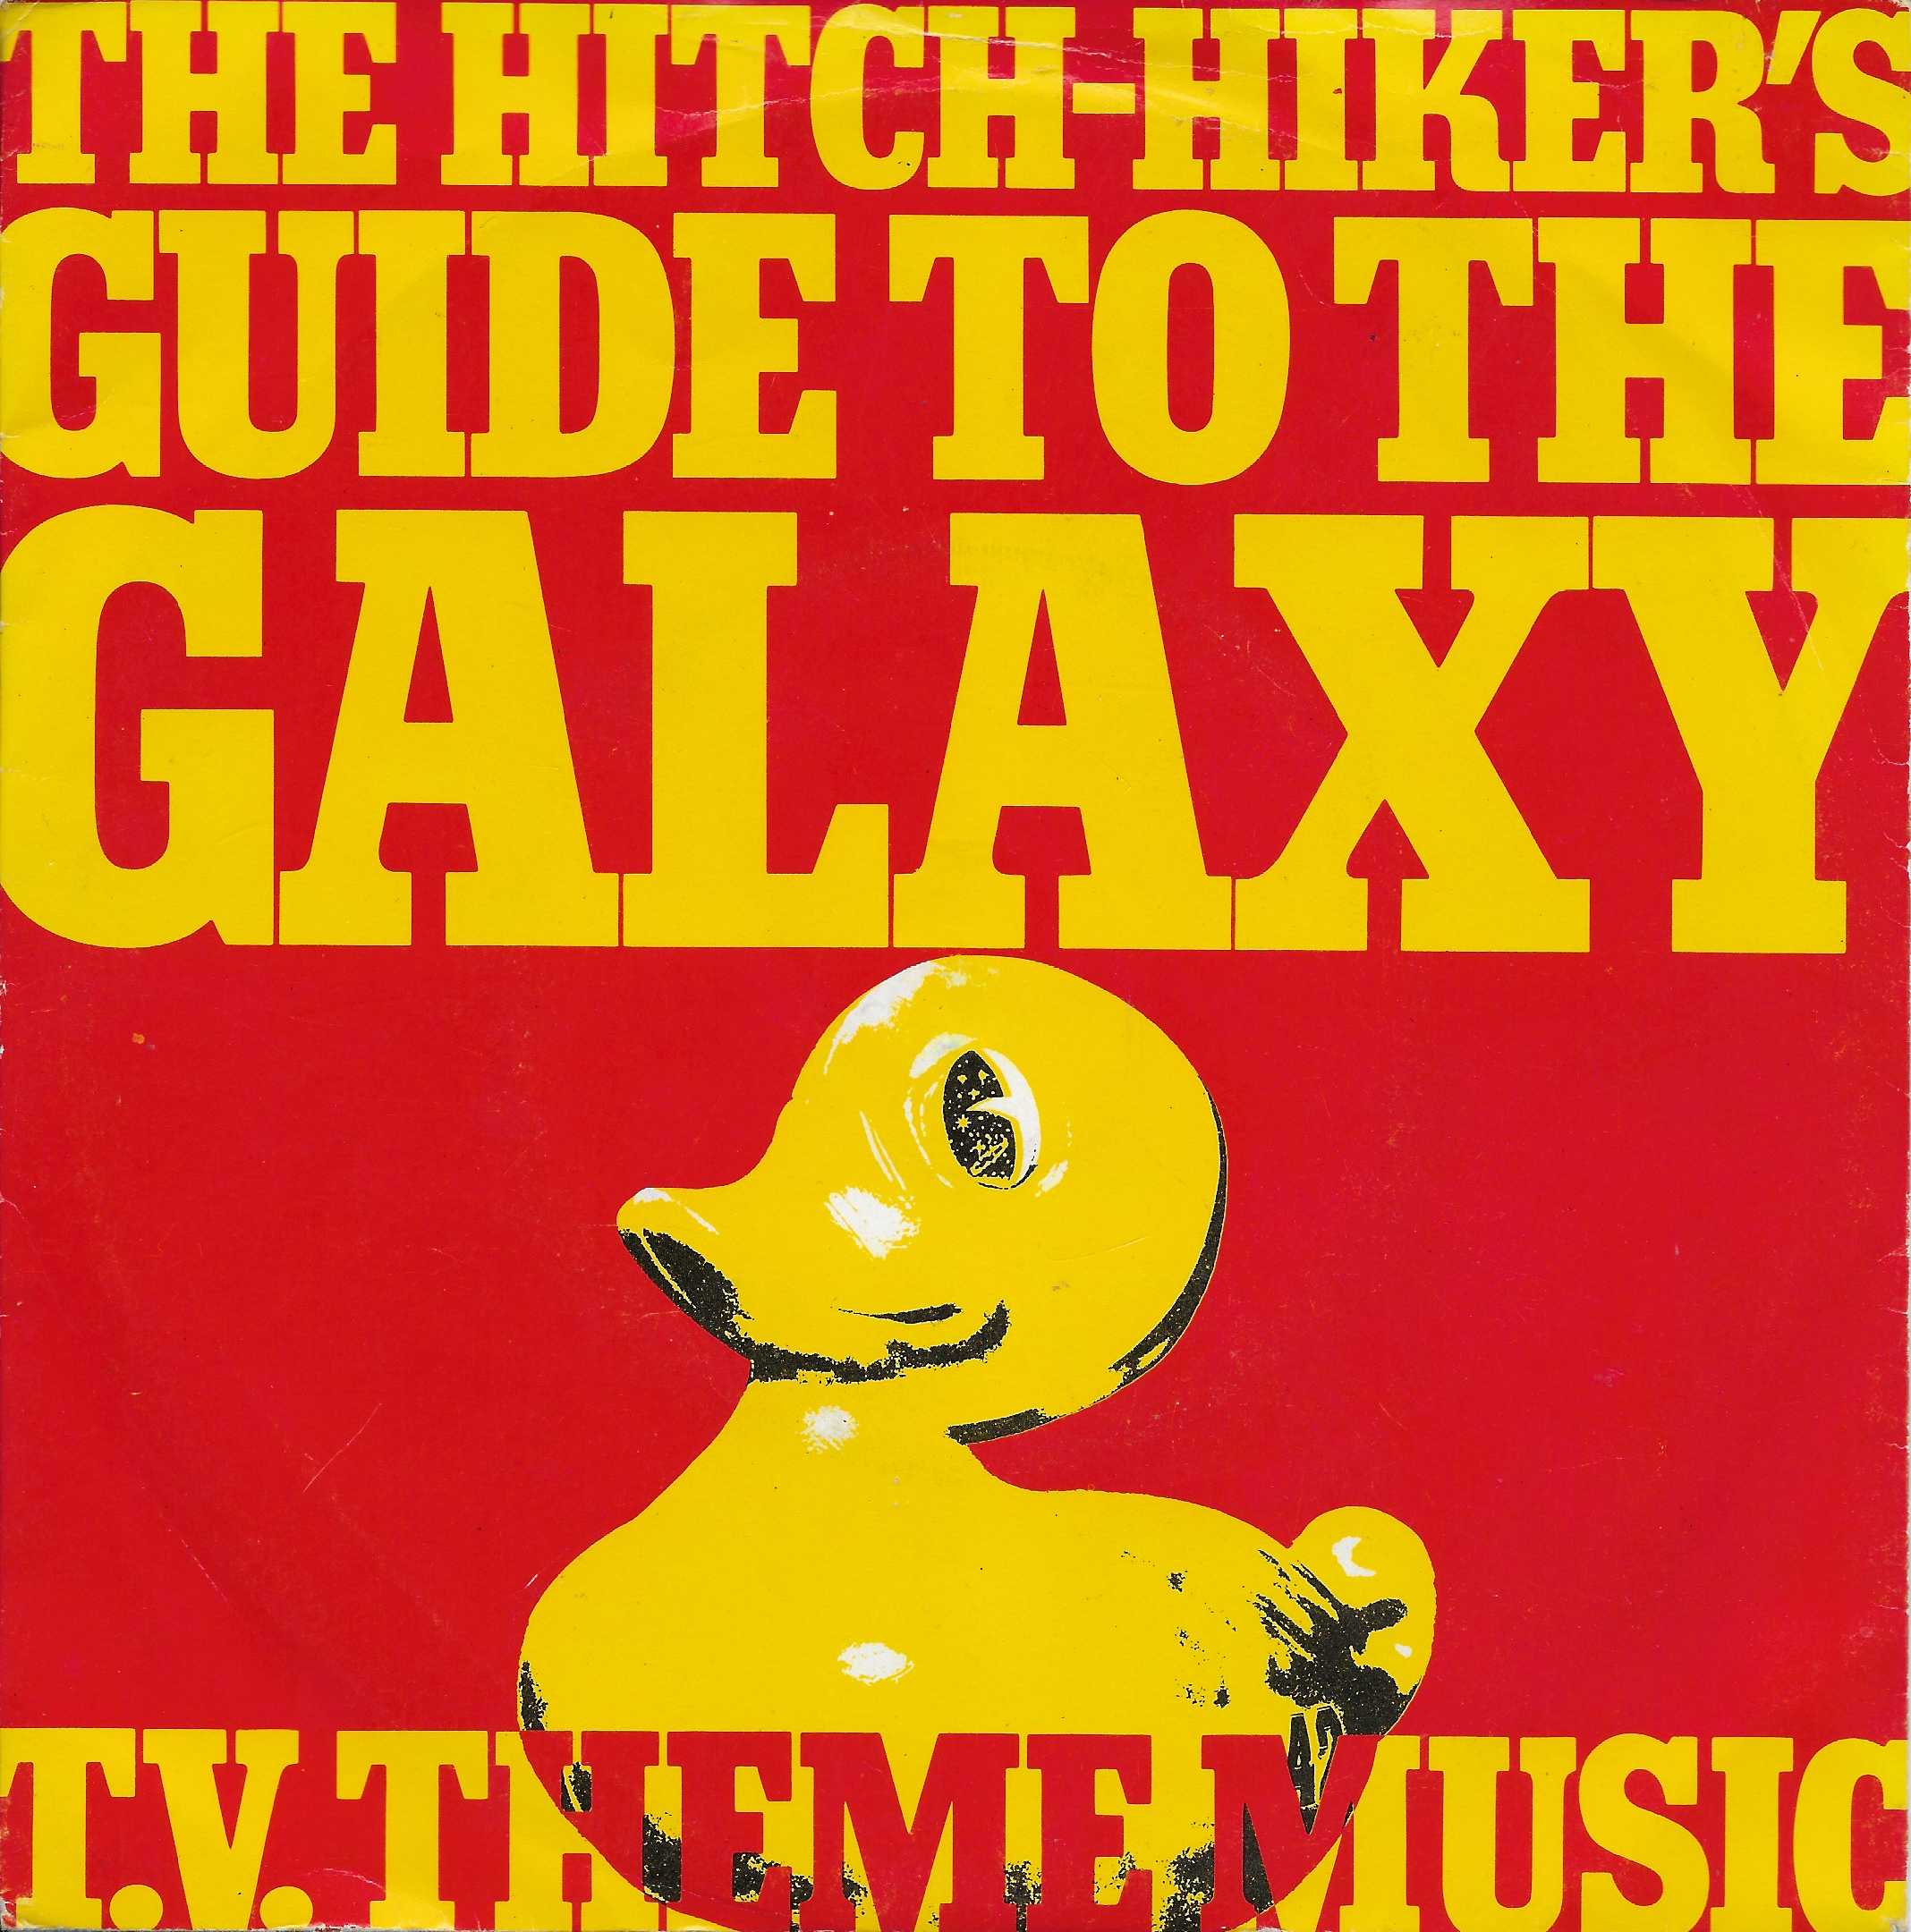 Picture of ABO 5 Journey of the sorcerer (Hitch-hiker's guide to the galaxy) - Promotional record by artist B. Leardon / T Souster / Eagles from the BBC singles - Records and Tapes library